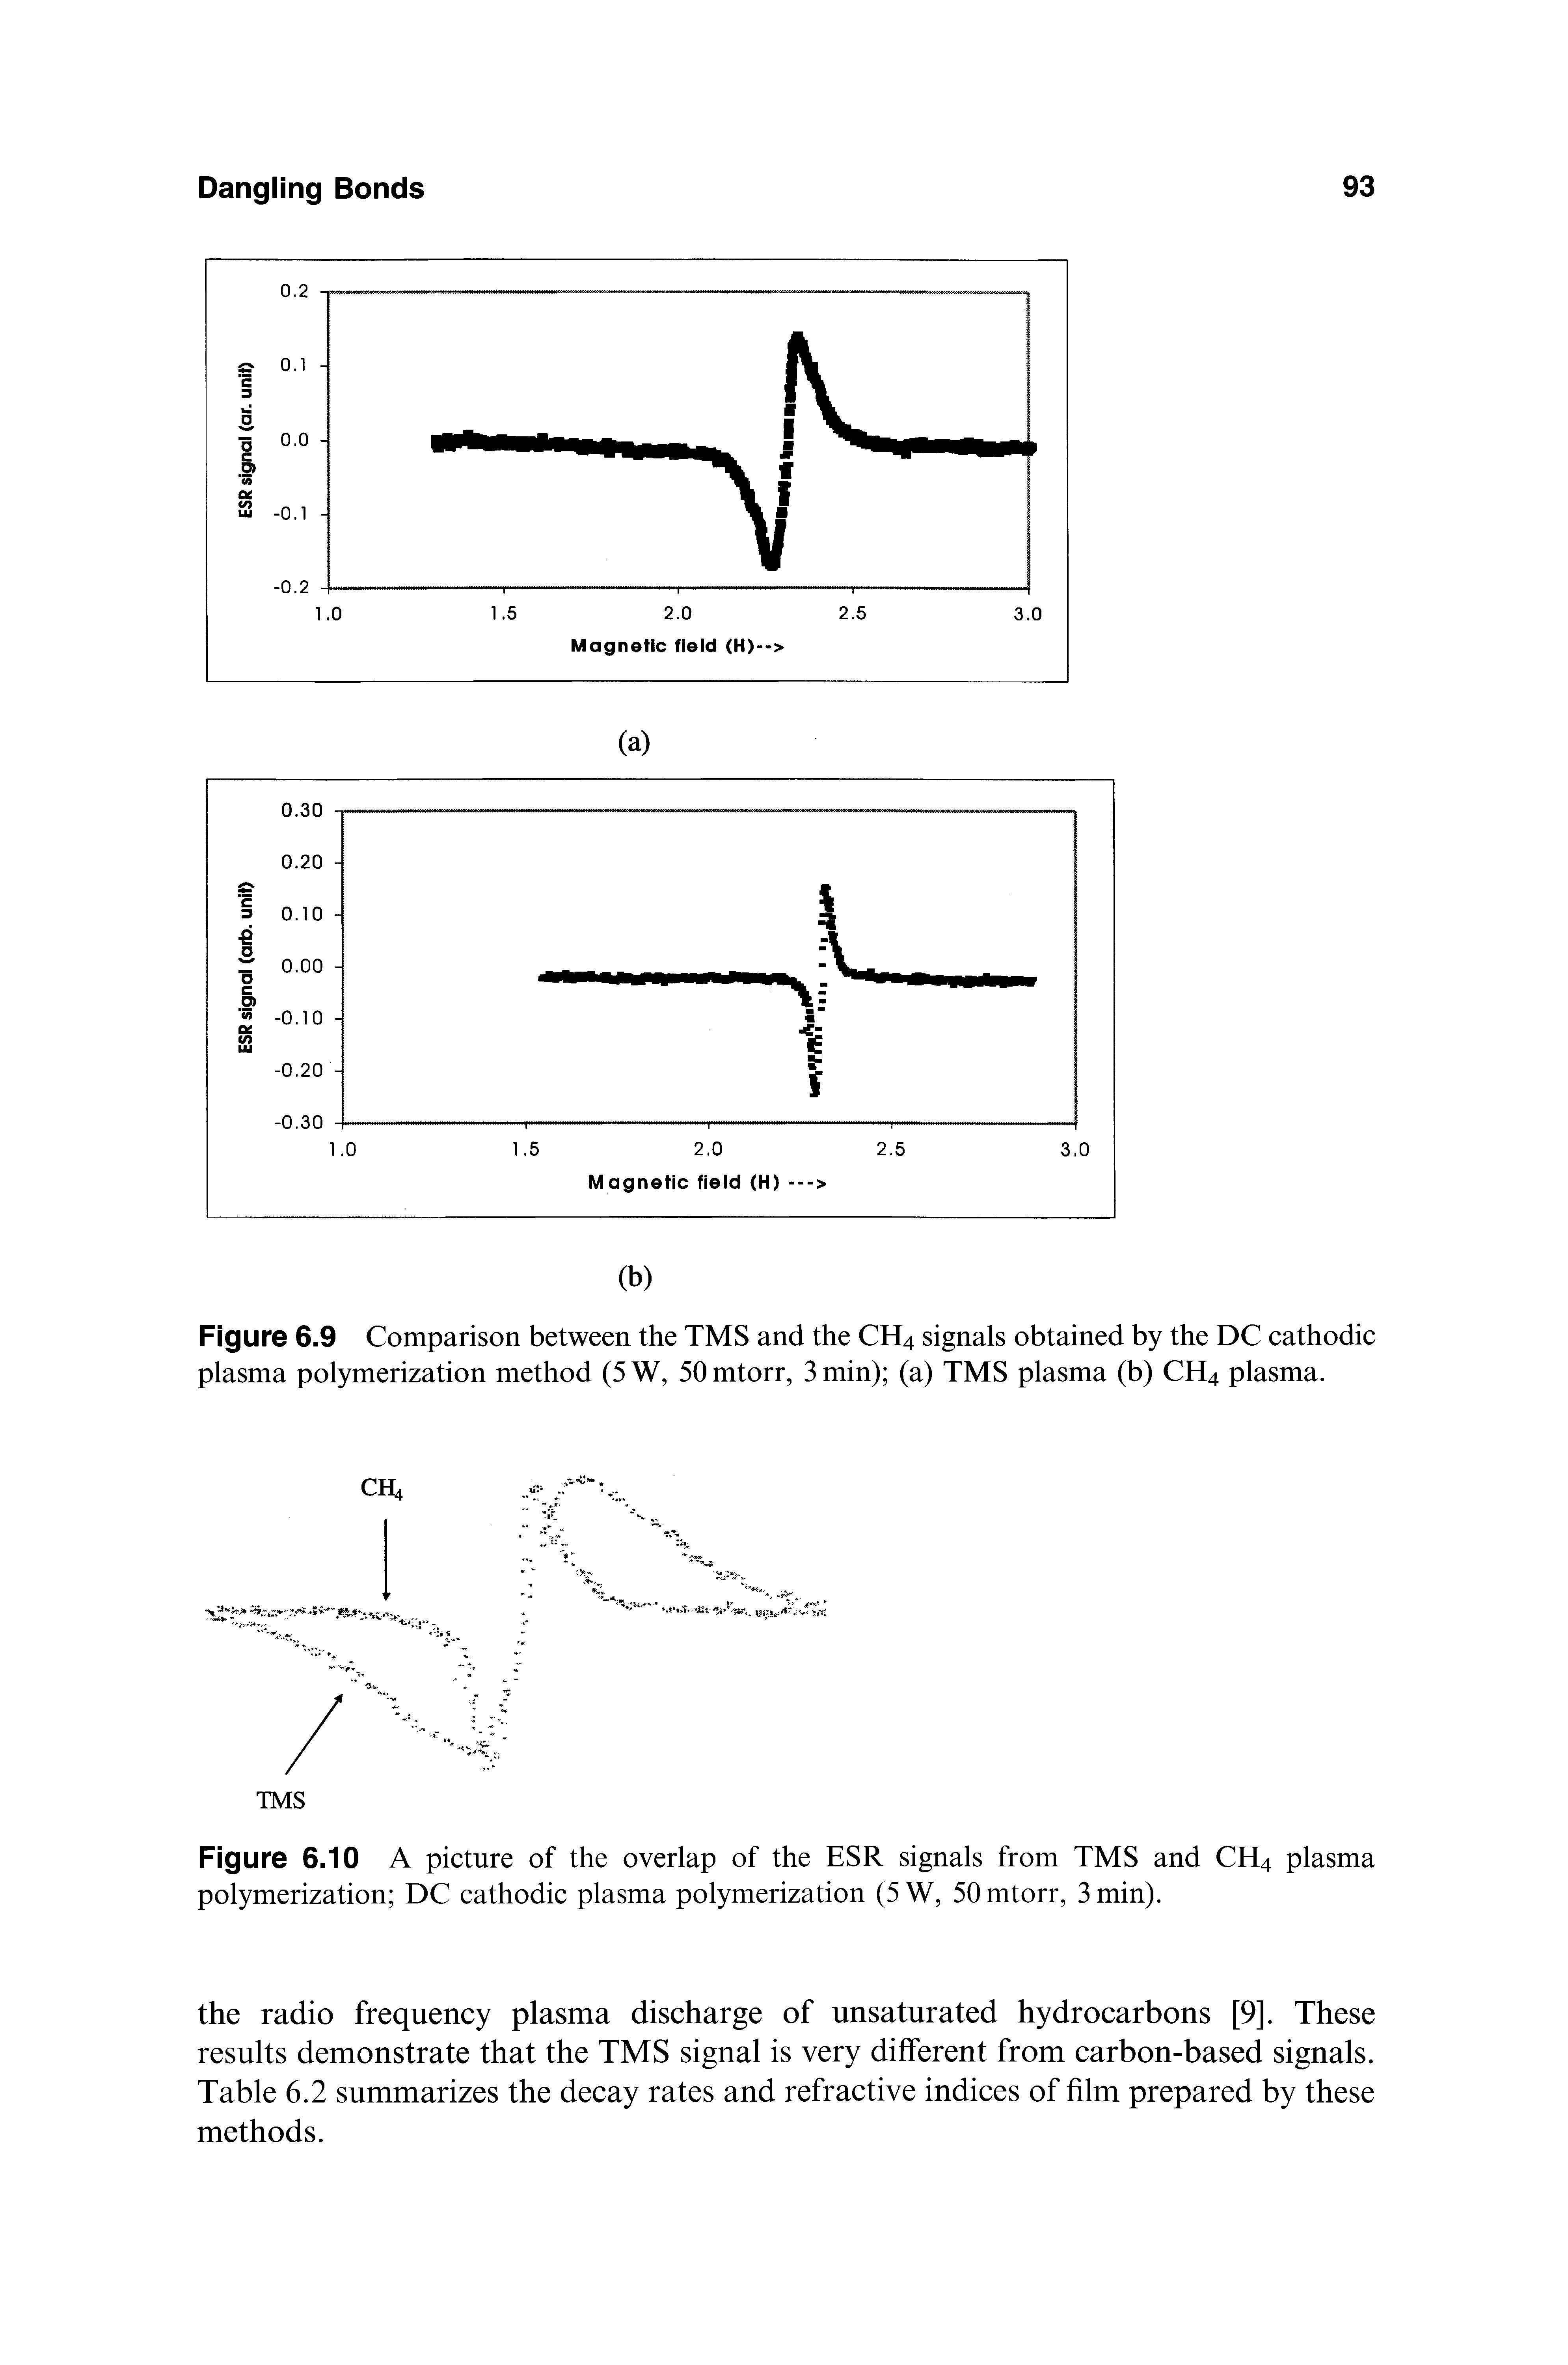 Figure 6.9 Comparison between the TMS and the CH4 signals obtained by the DC cathodic plasma polymerization method (5 W, 50 mtorr, 3 min) (a) TMS plasma (b) CH4 plasma.